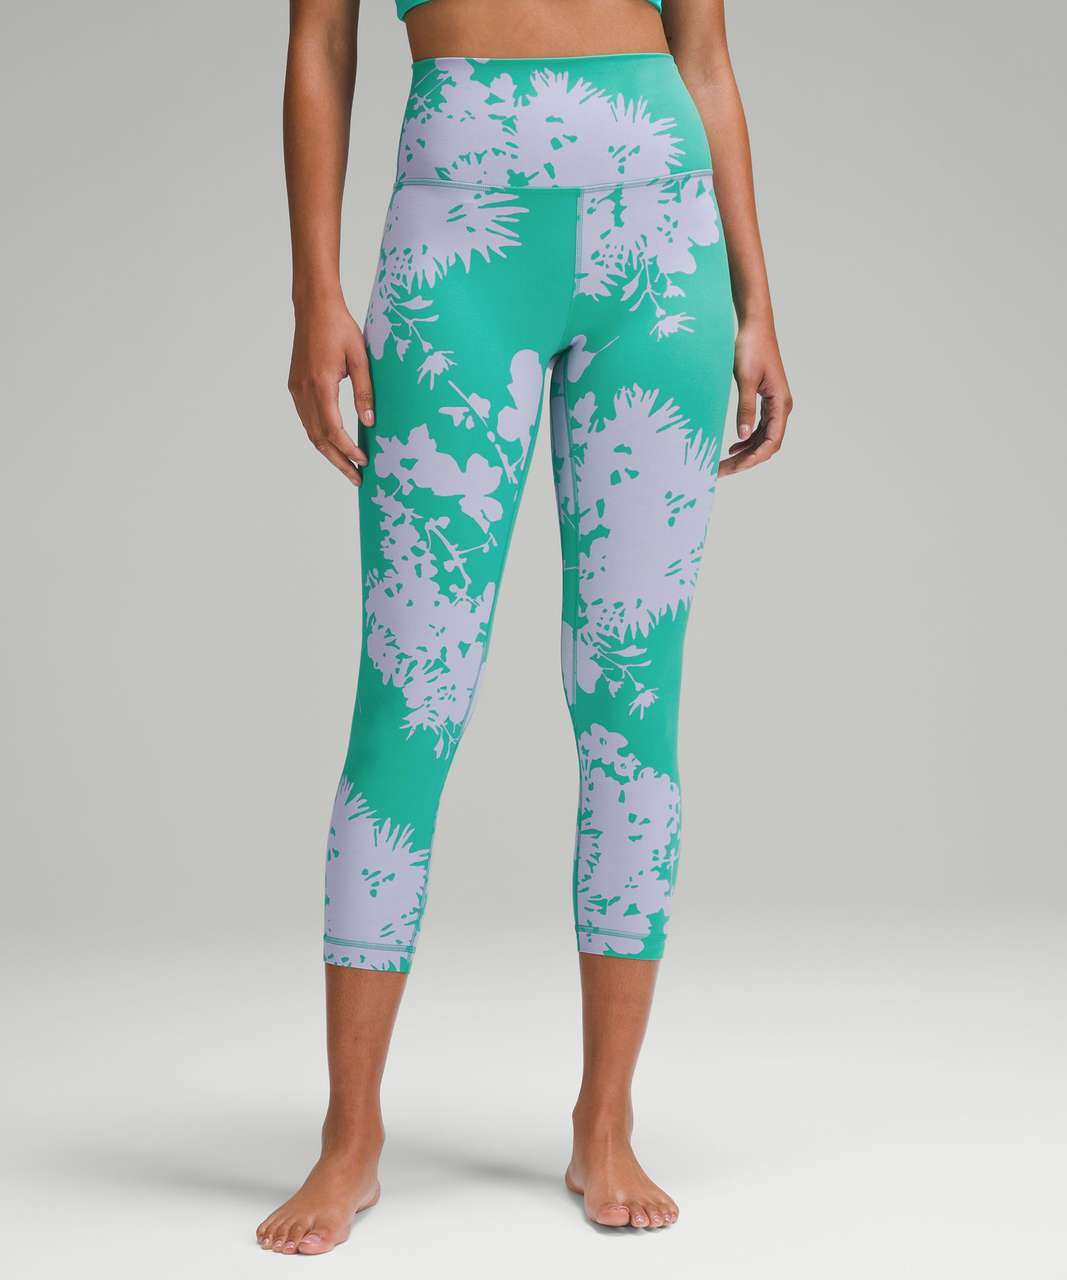 Lululemon Align High-Rise Crop 23" - BLOSSOM SILHOUETTE MAX Lilac Smoke Kelly Green